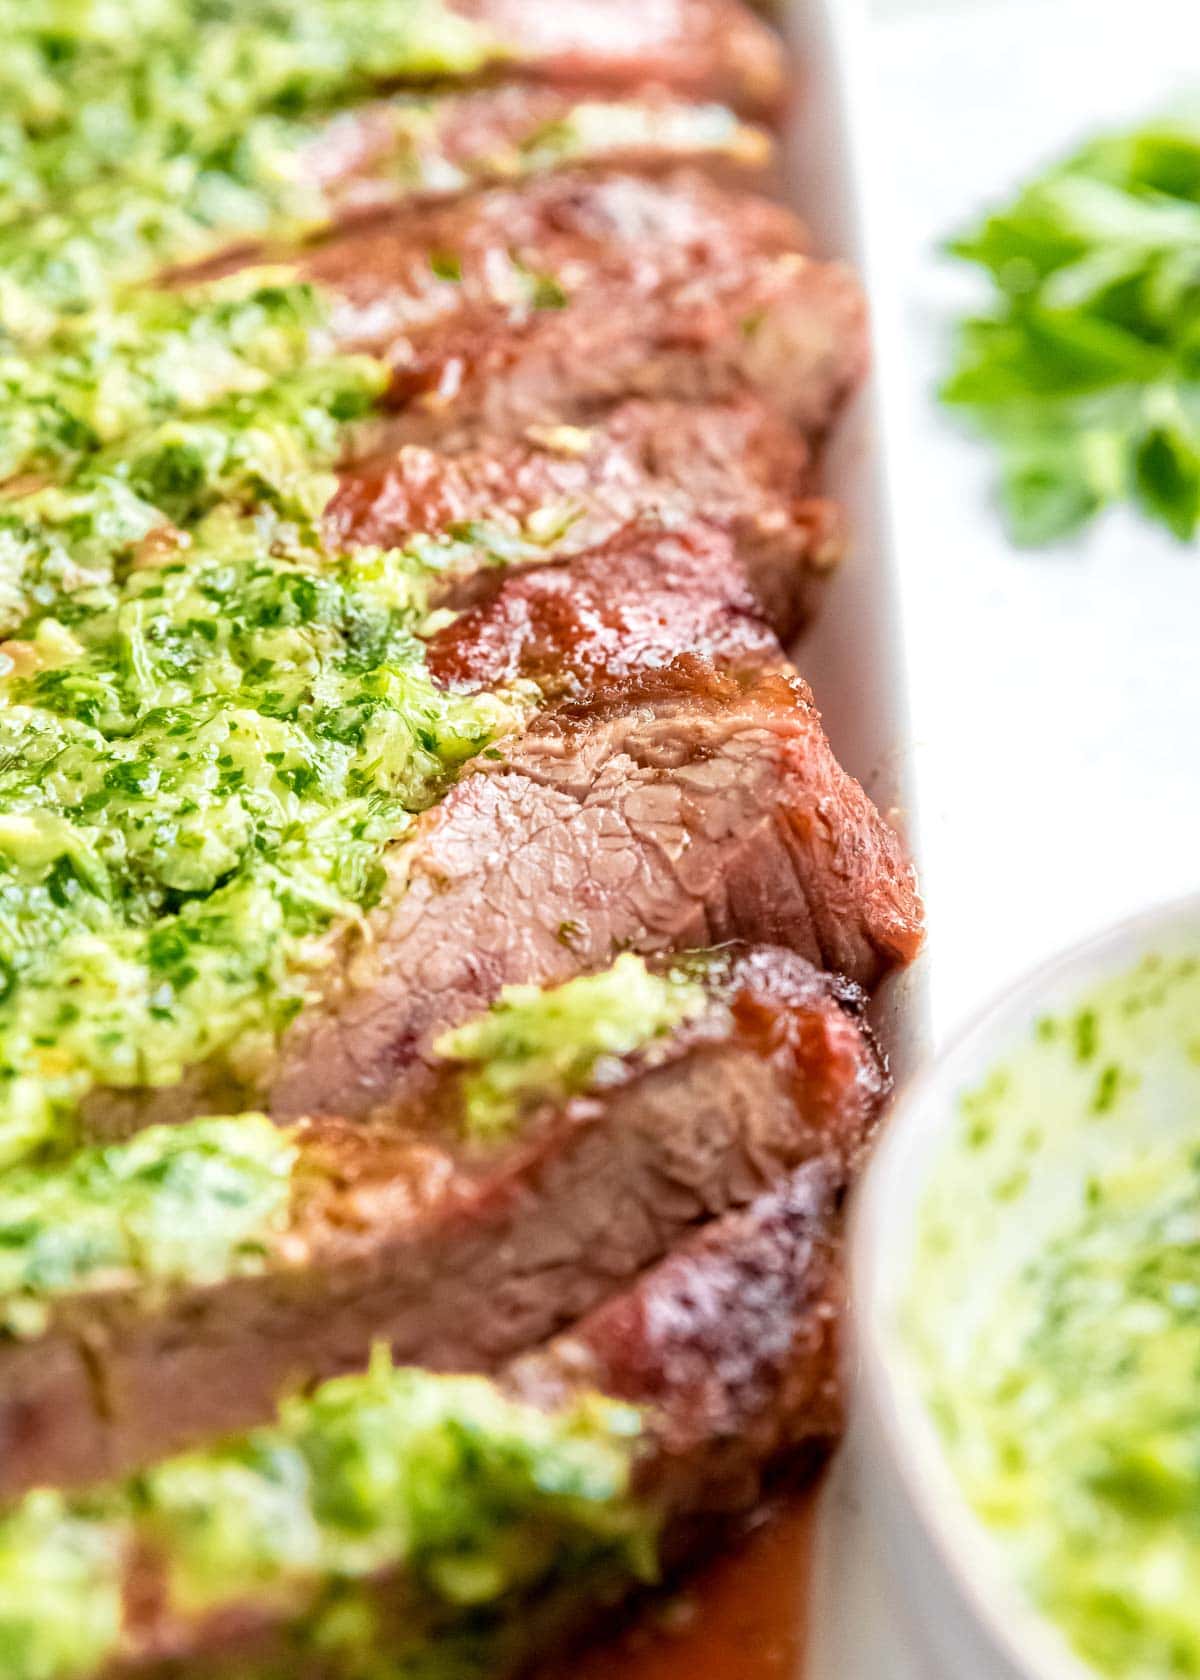 Juicy marinated Flank Steak is grilled to perfection and topped with zesty homemade Chimichurri sauce! This low-carb recipe is perfect for cookouts, parties, or a delicious weekend meal!